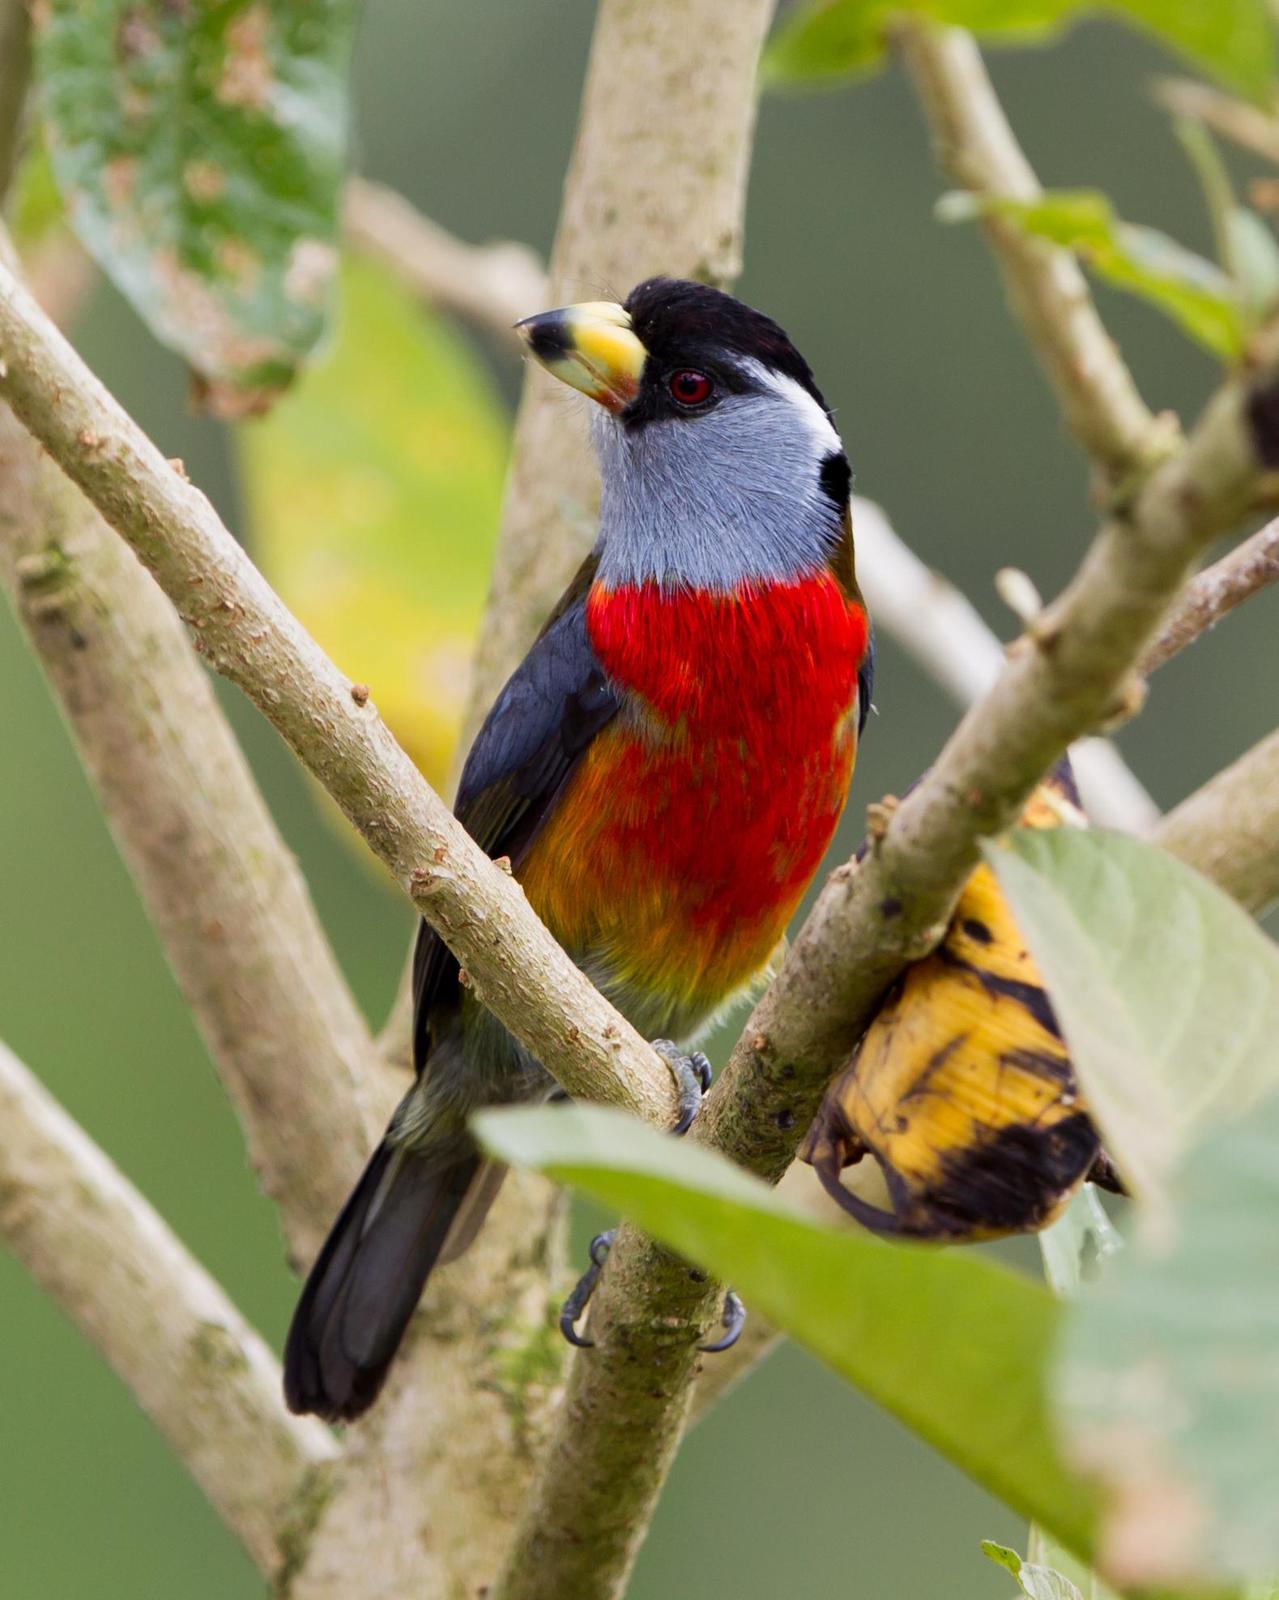 Toucan Barbet Photo by Kevin Berkoff